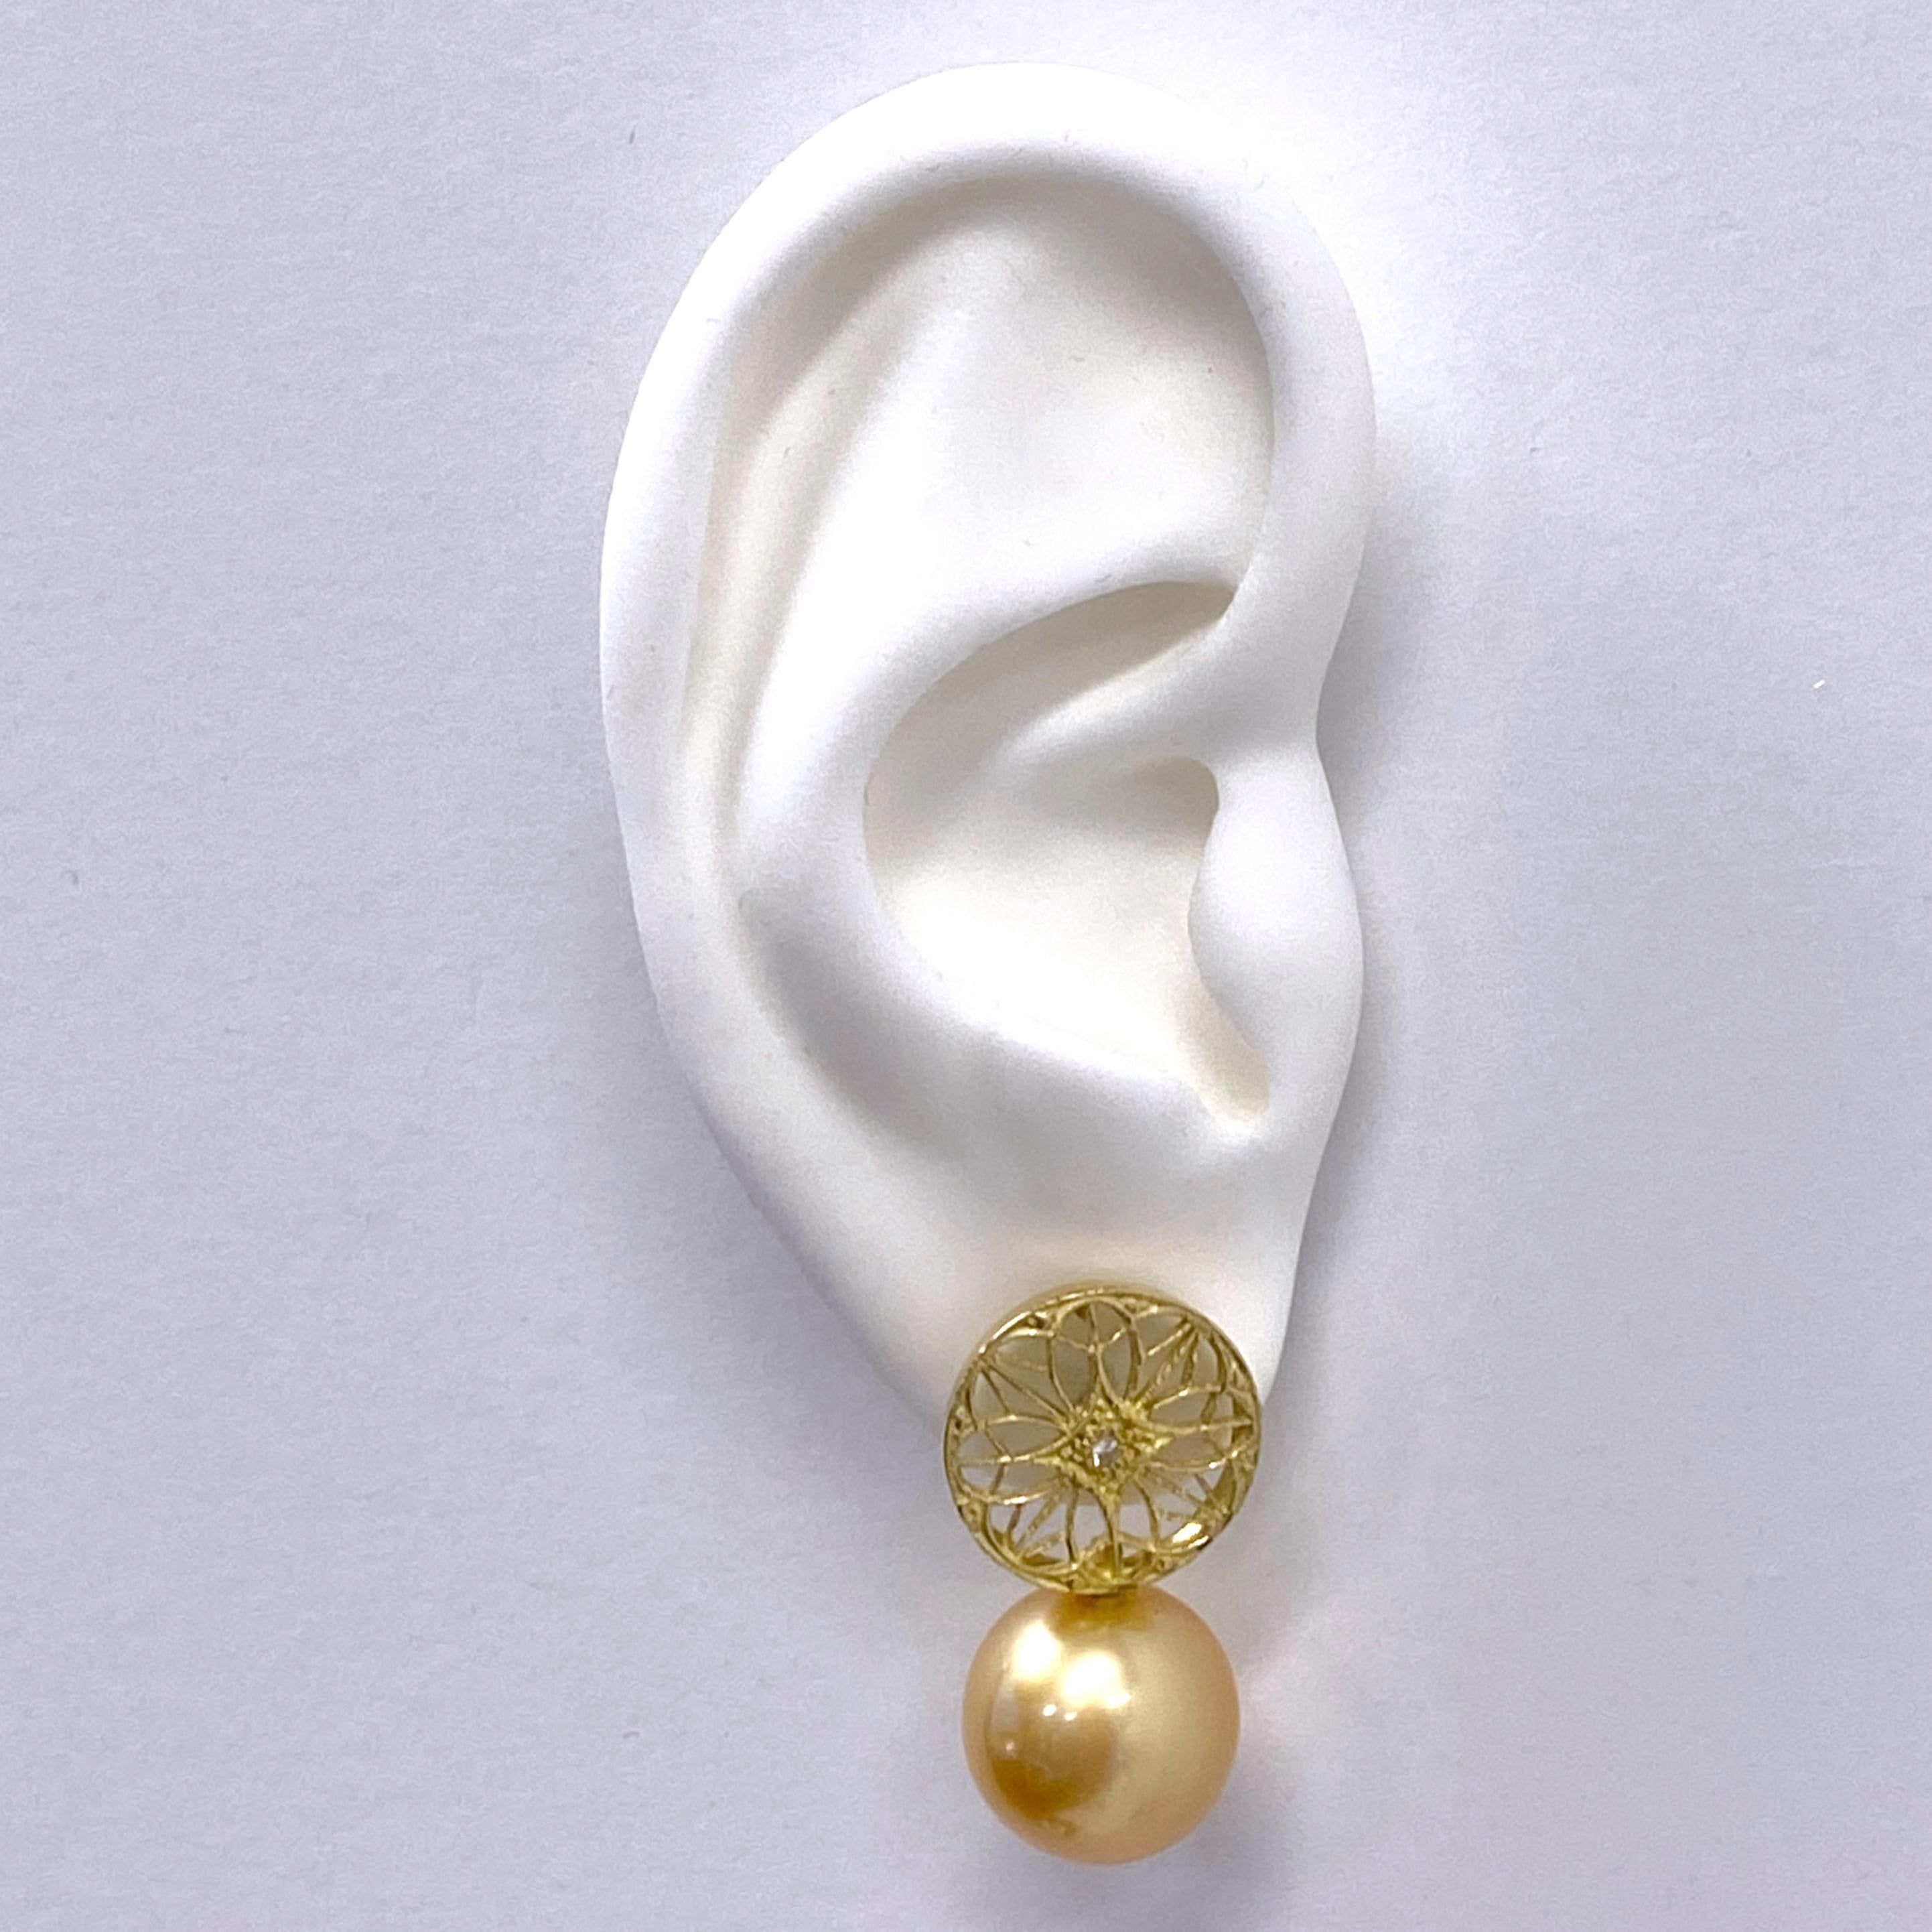 Contemporary Golden South Sea Pearl Earrings with 18k Gold Filigree Tops, Diamond Accent For Sale